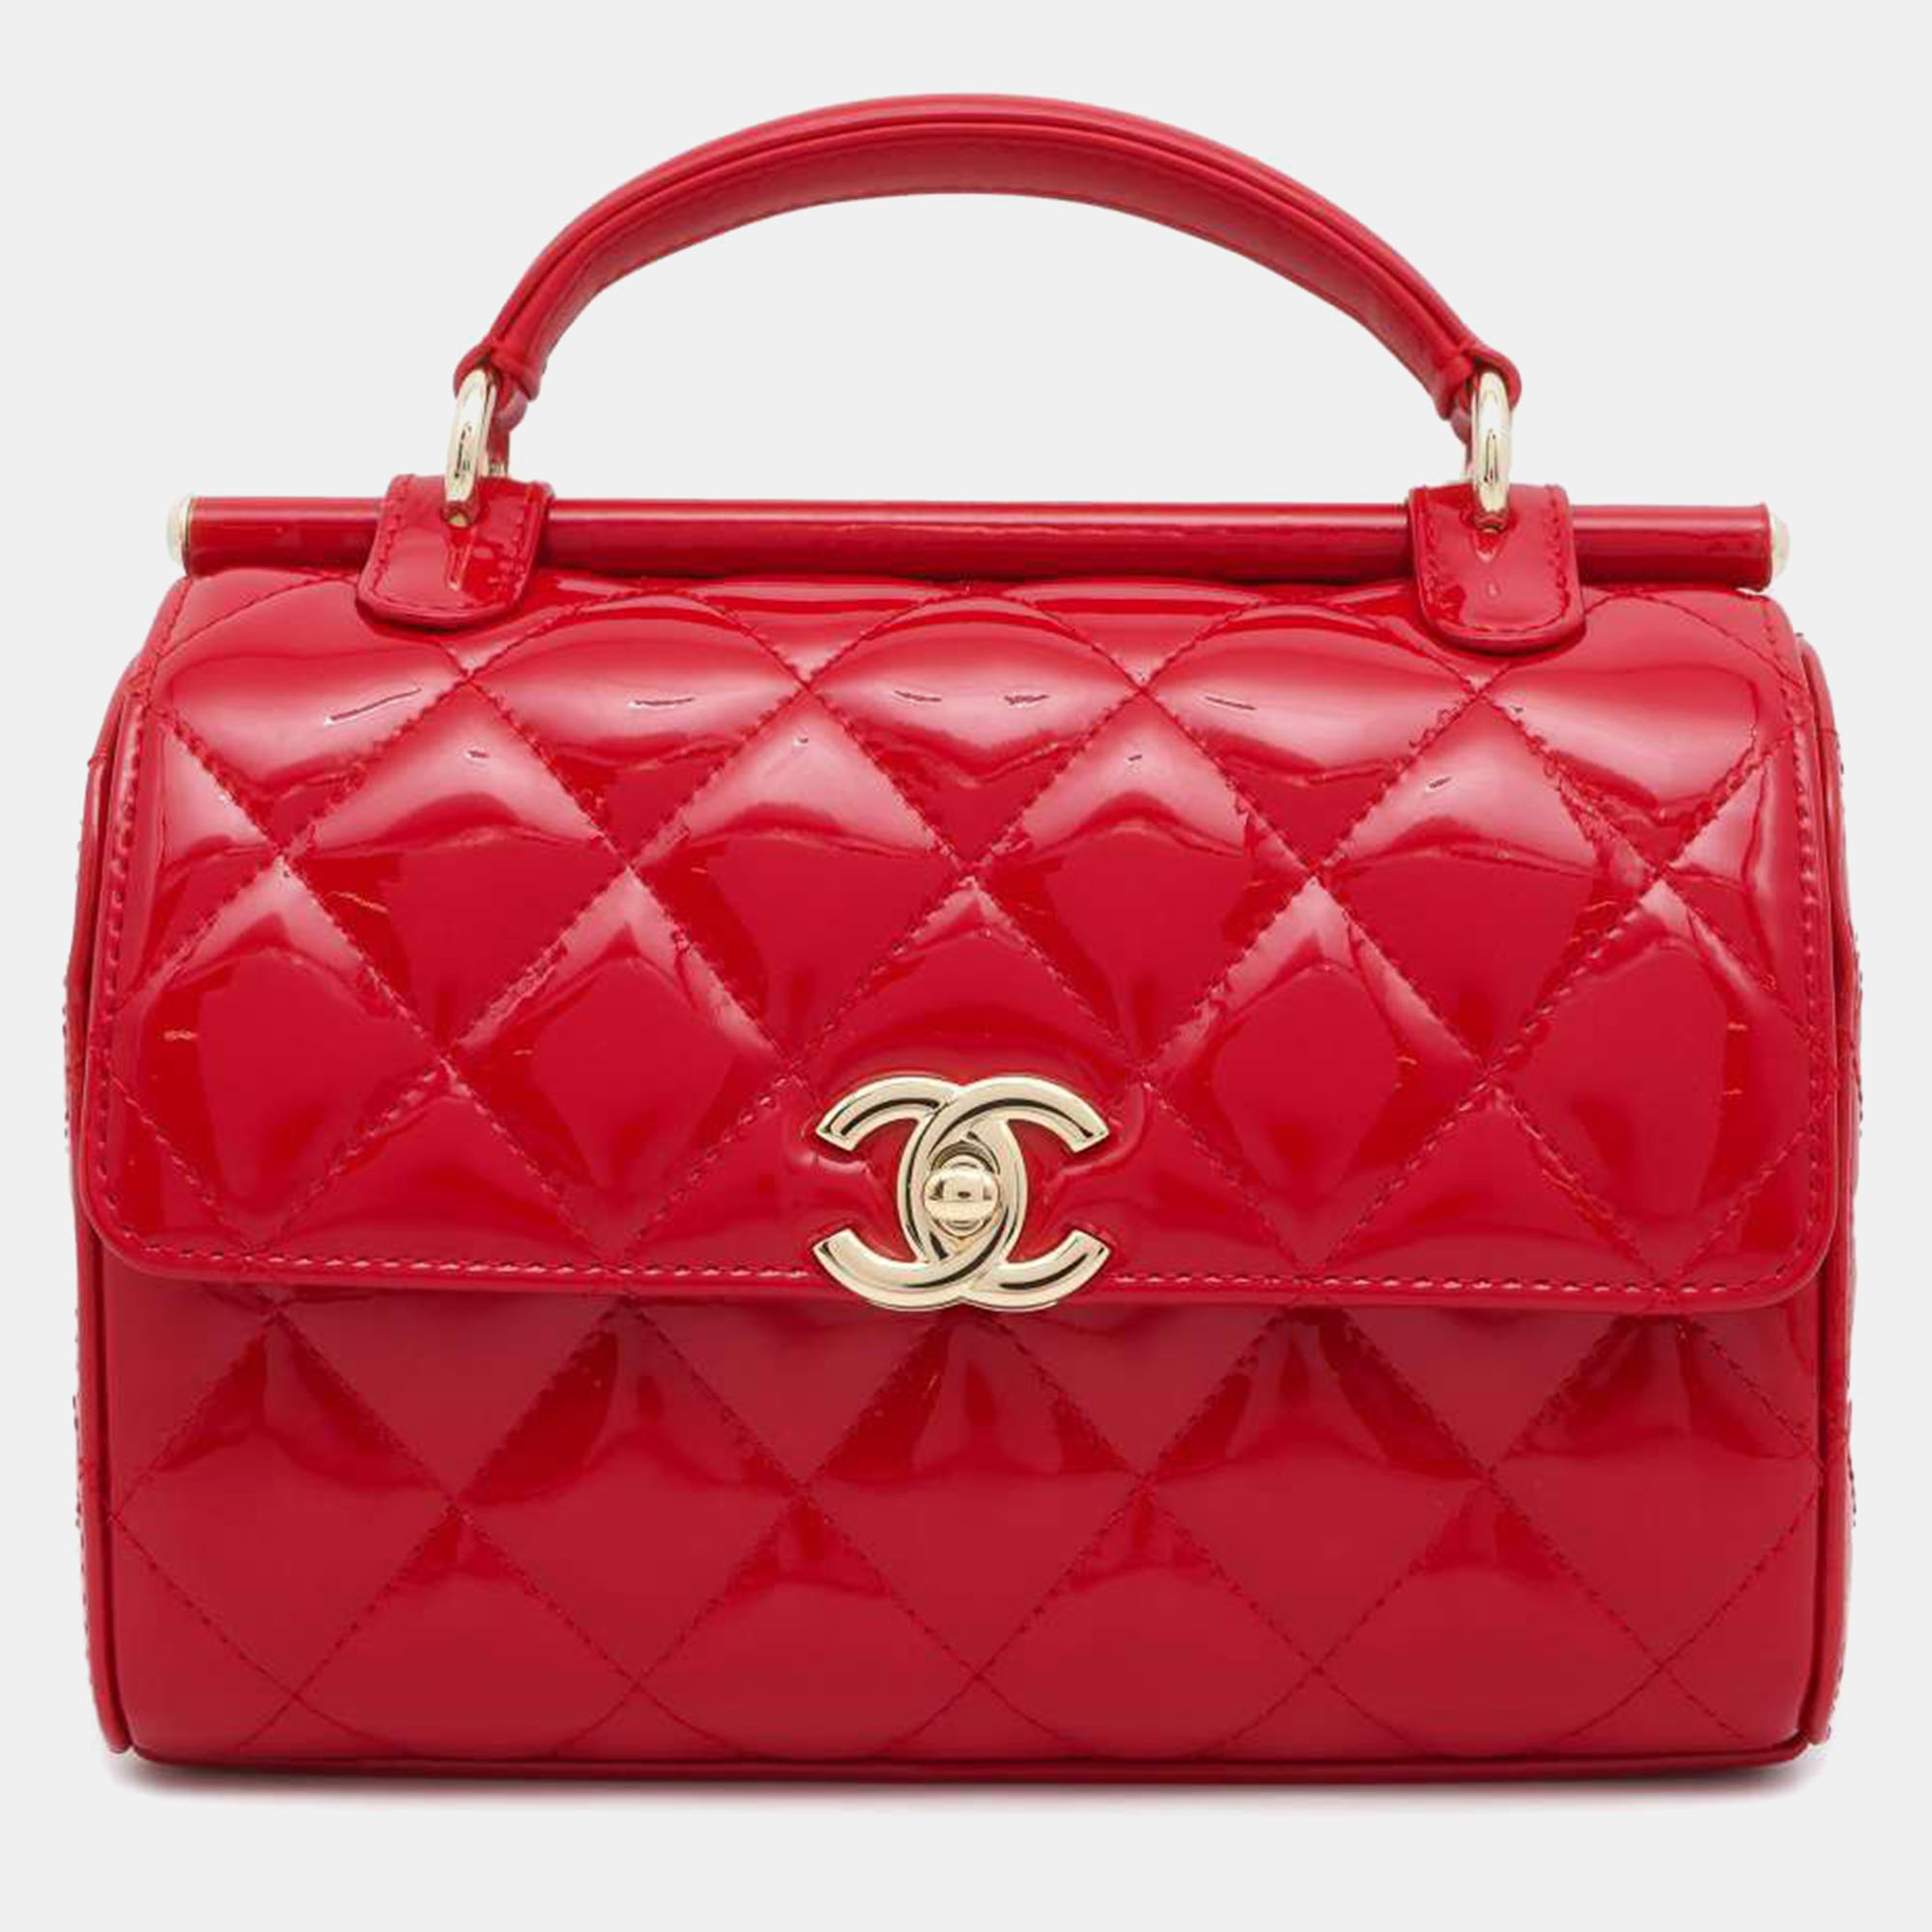 Chanel red patent leather small top handle handbag